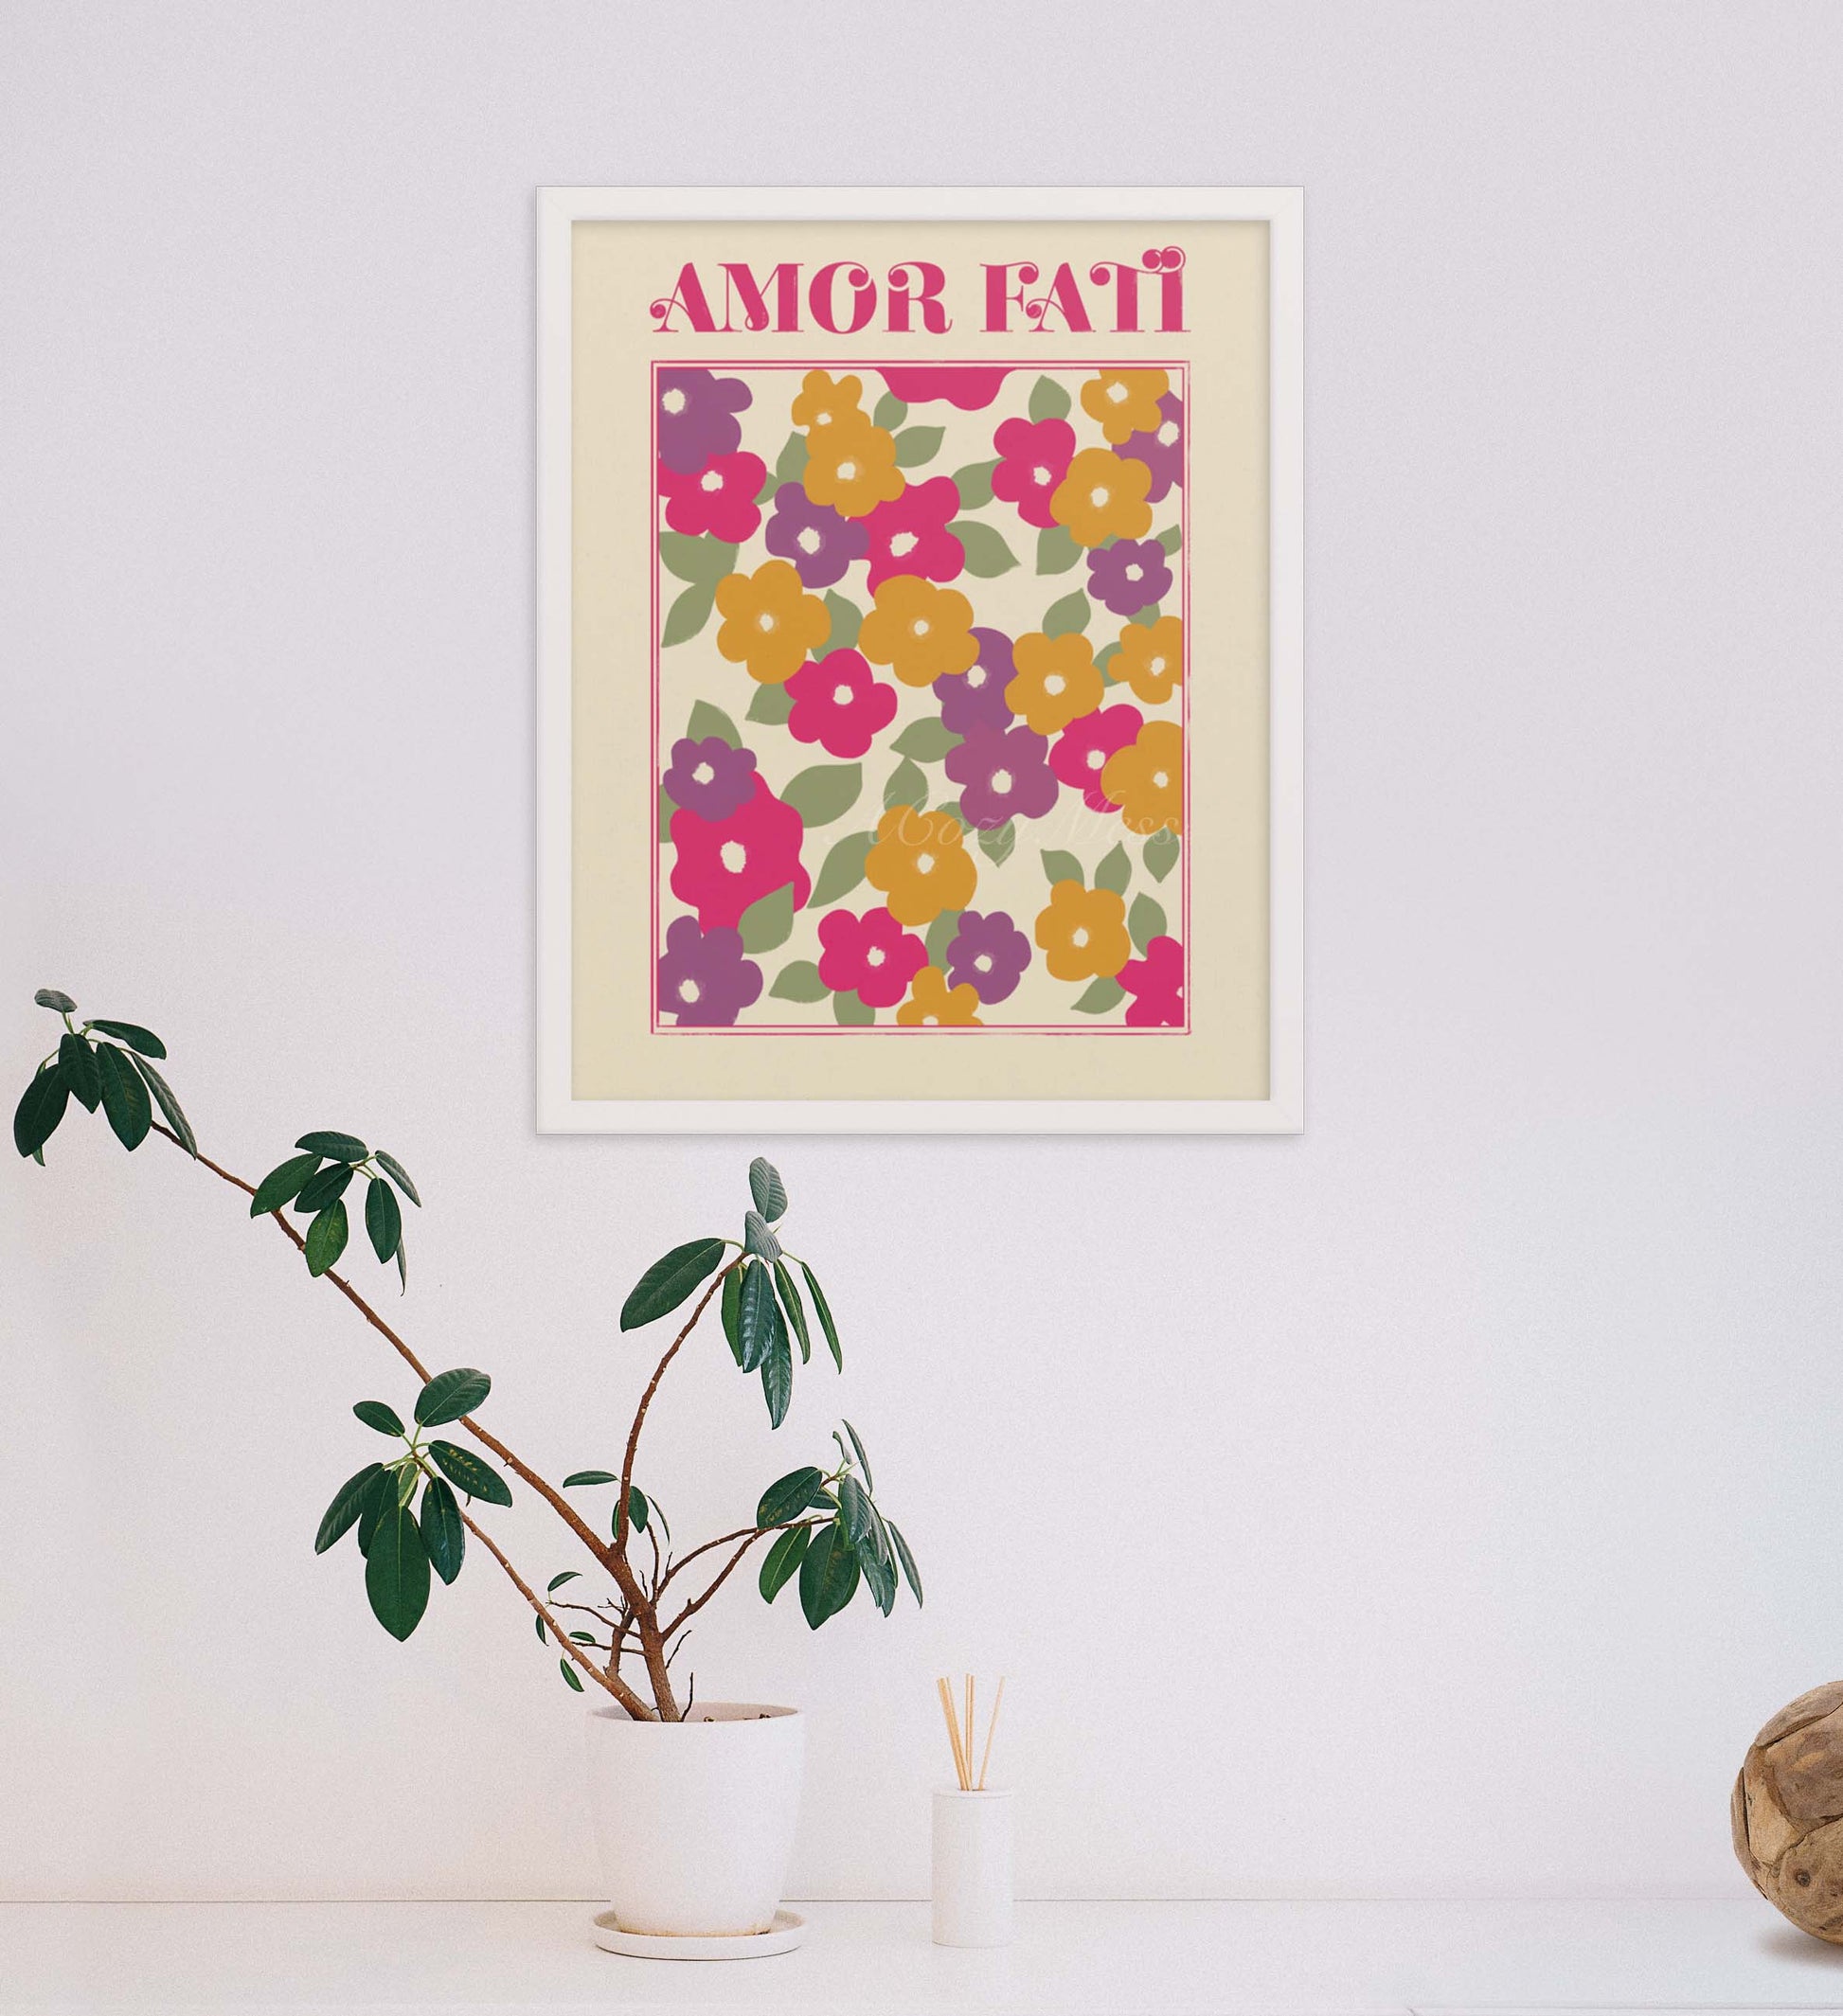 Amor Fati abstract Floral design Art Poster in bight pink, purple, green & green on light beige background in white frame.